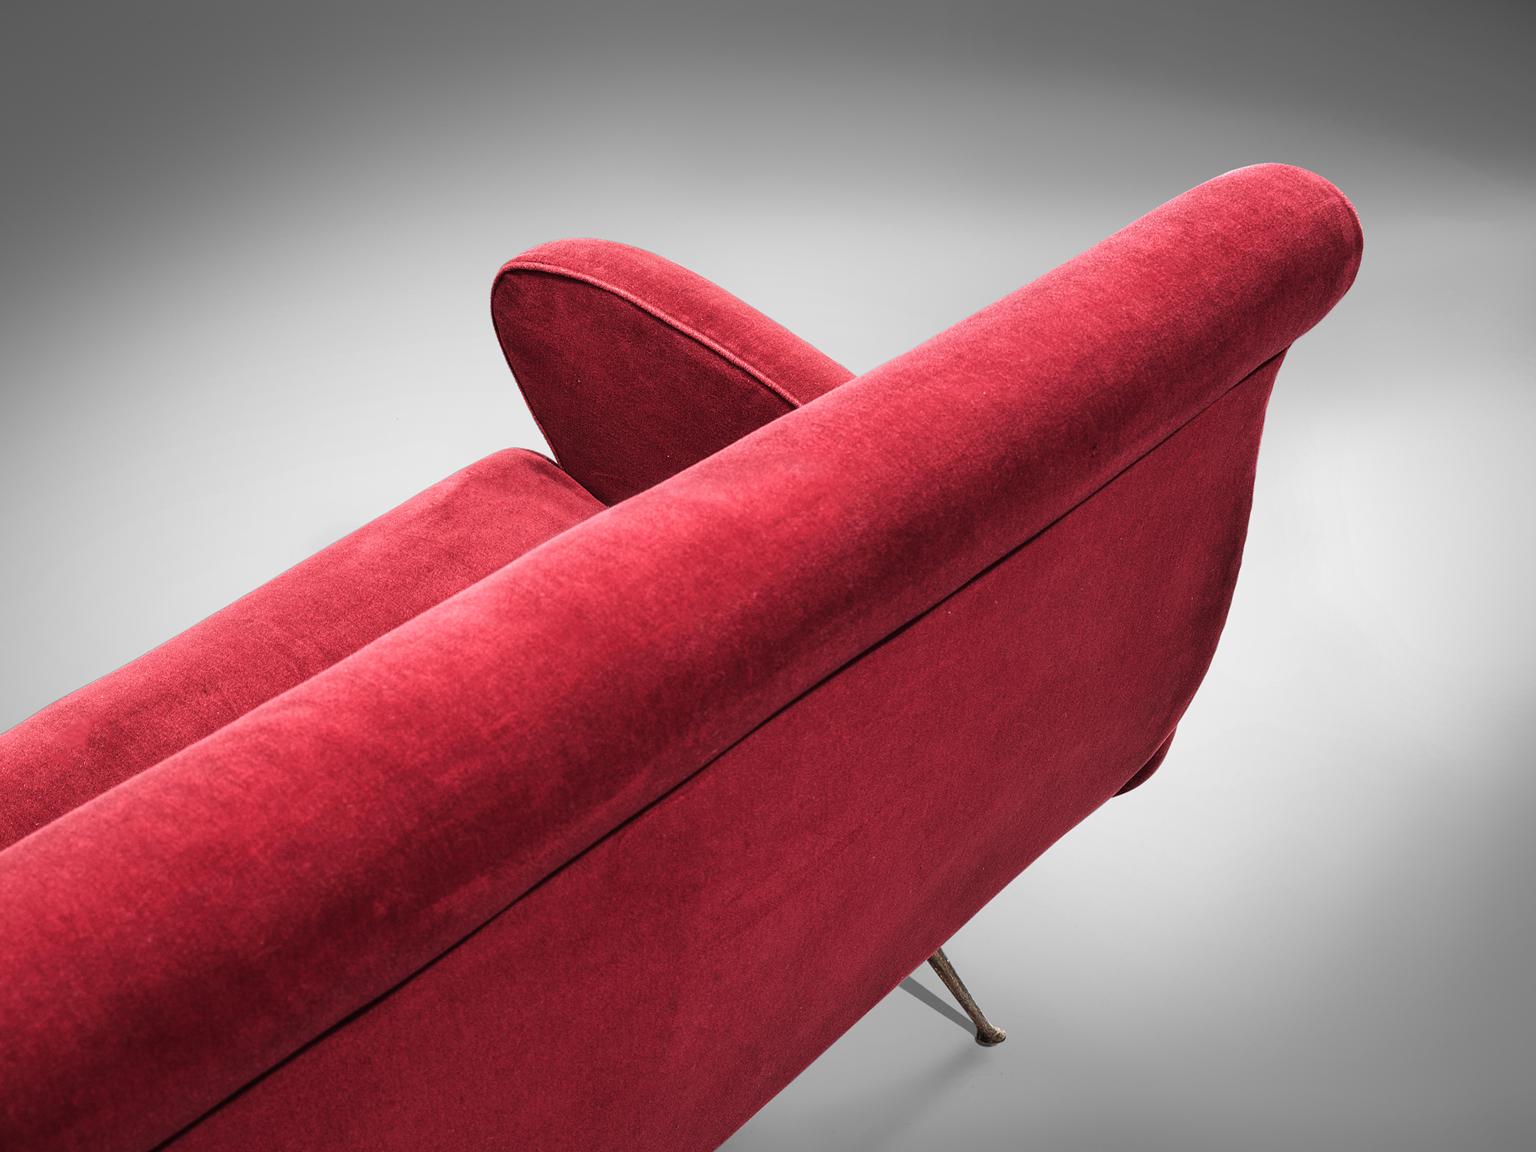 Lounge set, red velvet, brass, Italy, 1950s.

This set is an iconic example of Italian design from the fifties. Organic and sculptural, the two-seat sofa and two matching lounge chairs with ottomans is anything but minimalistic. Equipped with the